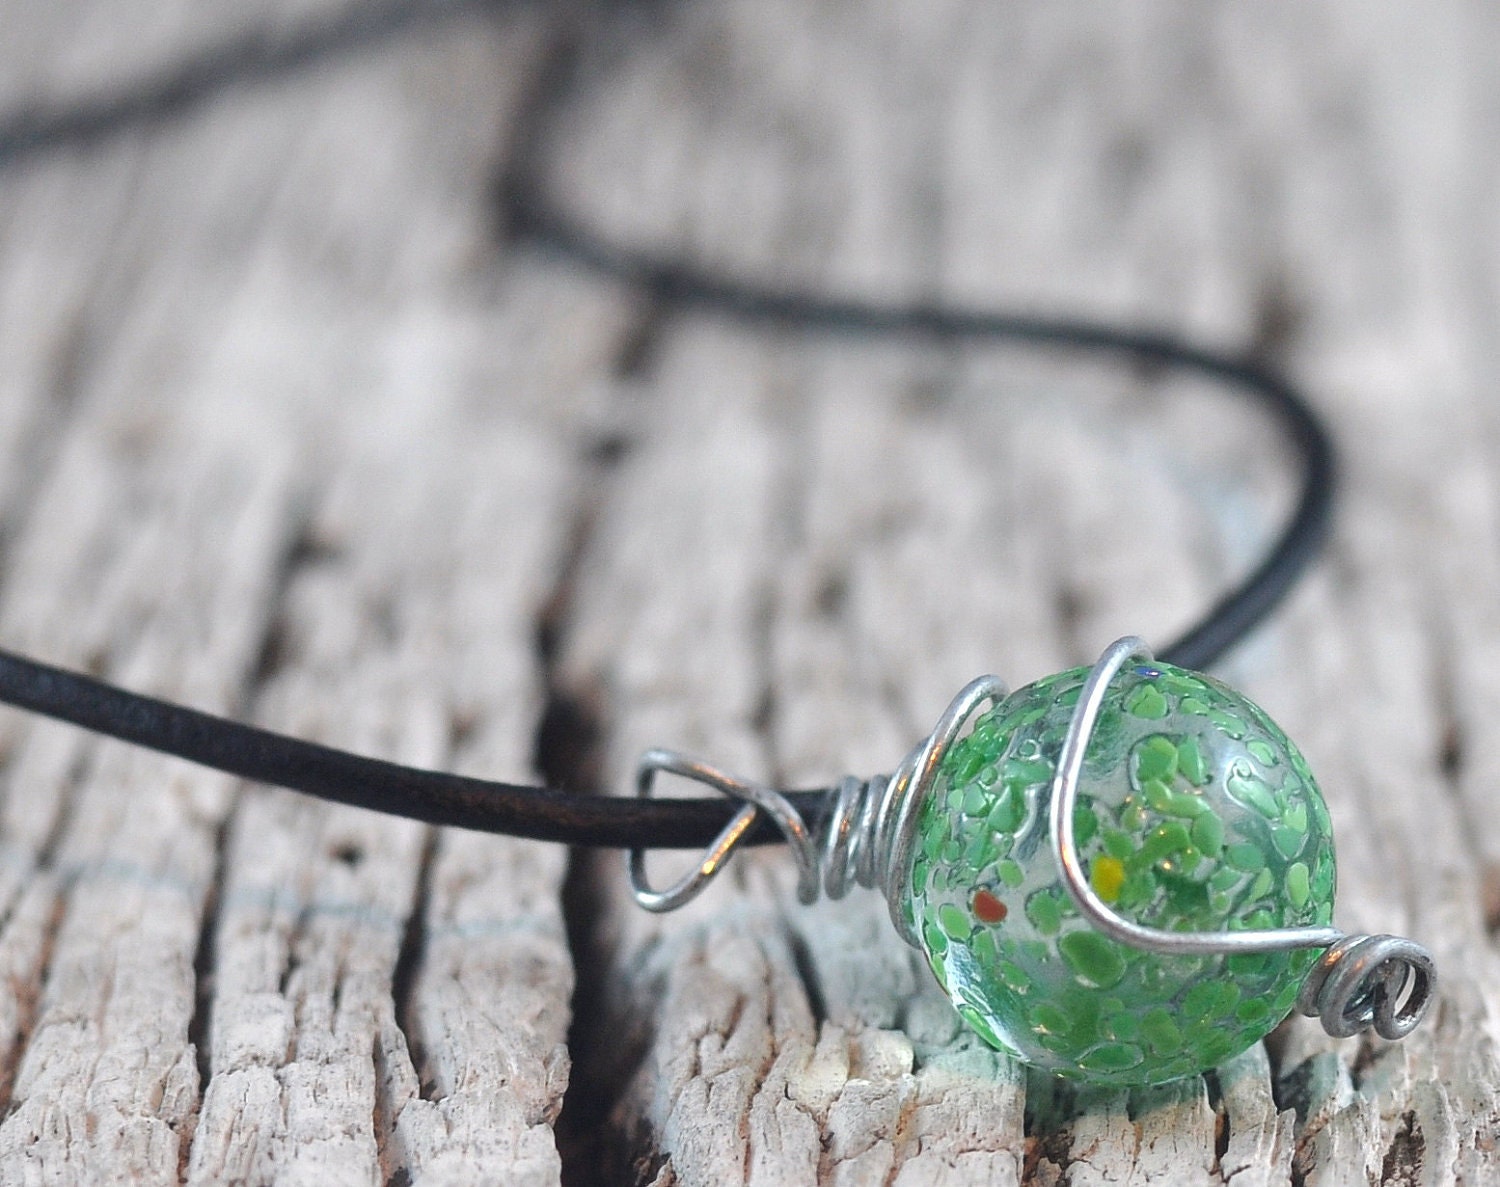 Green Marble Necklace  Wire Wrapped in Handmade Cage on Leather Thong in Handmade Felt Pouch. - DeeDeeDeesigns